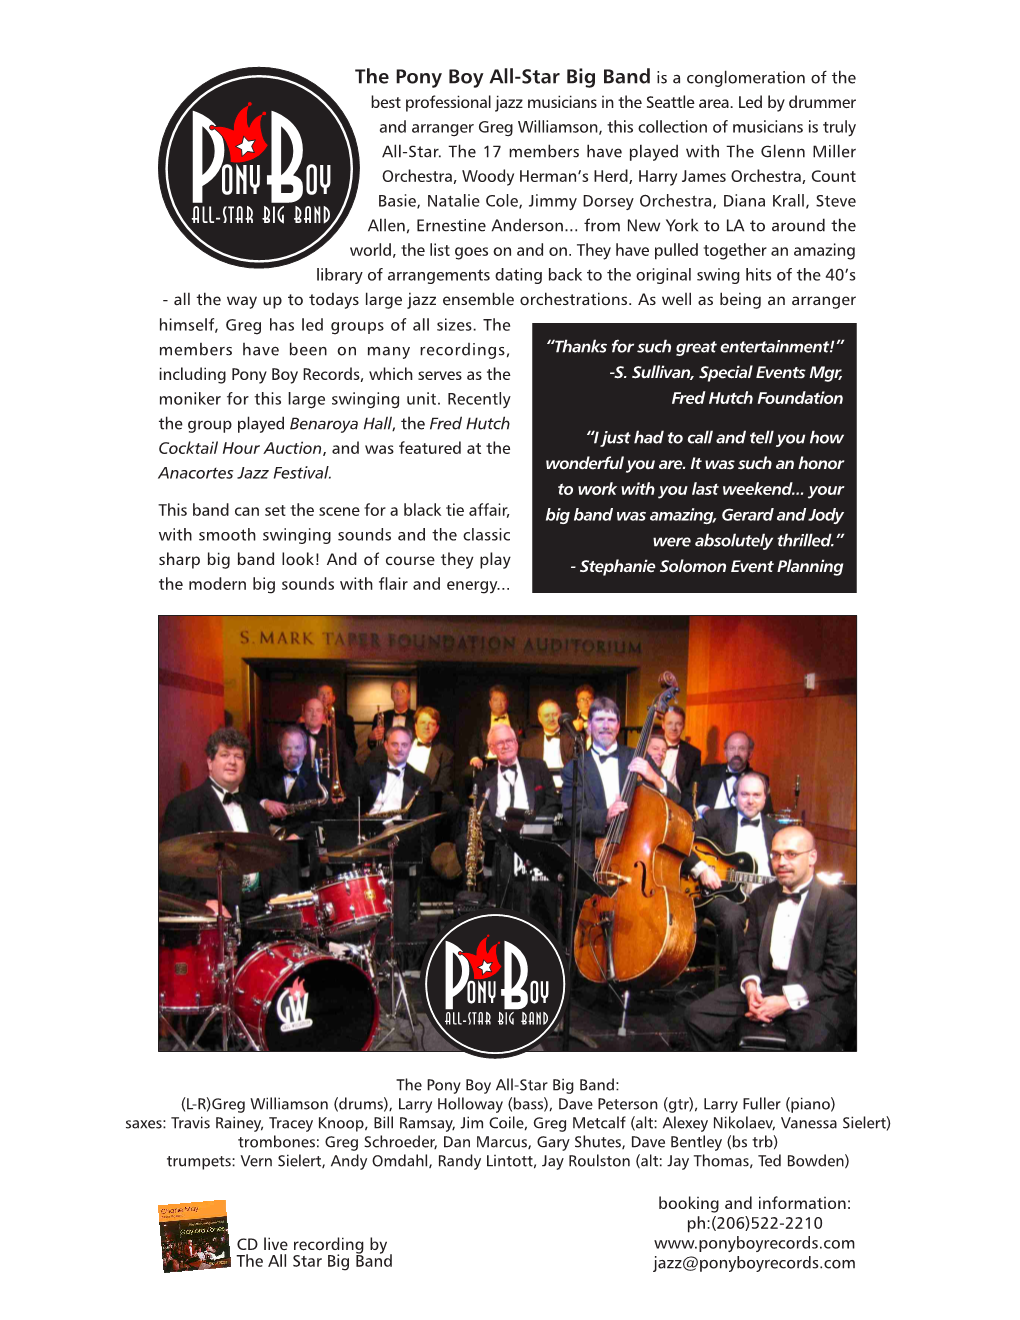 The Pony Boy All-Star Big Band Is a Conglomeration of the Best Professional Jazz Musicians in the Seattle Area